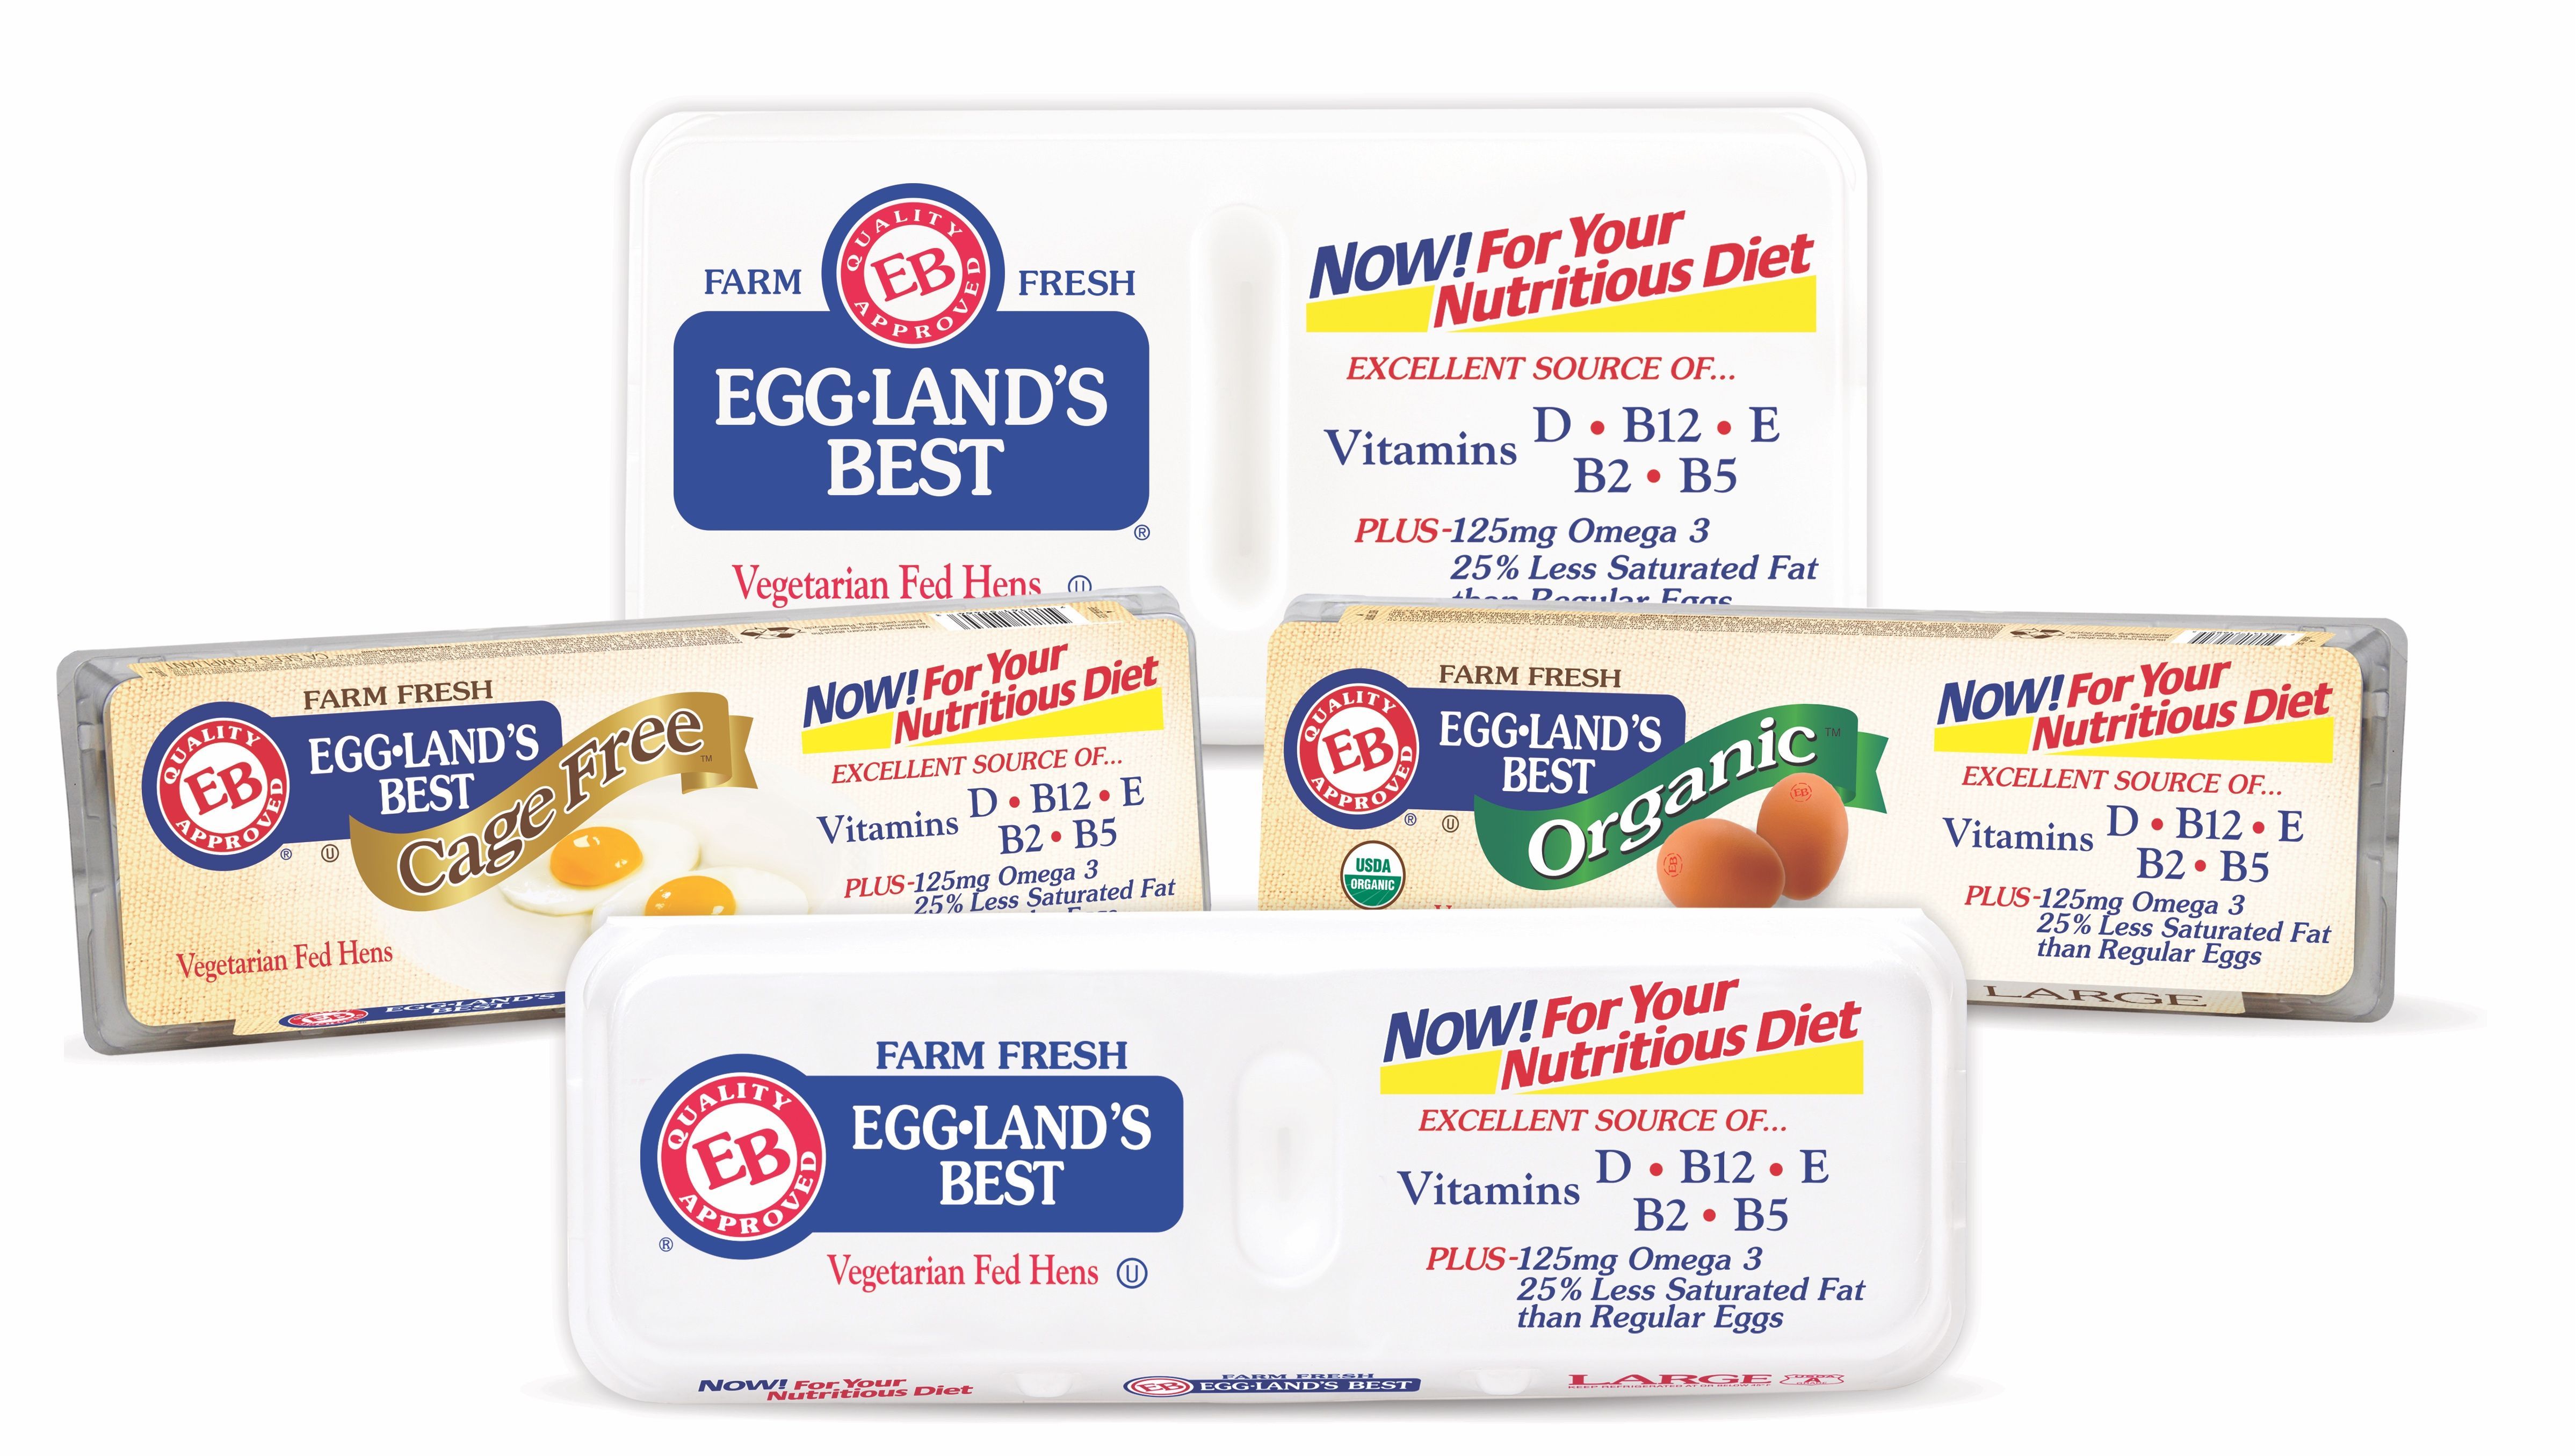 Eggland’s Best eggs are available in classic, cage-free and organic varieties at your local grocery store